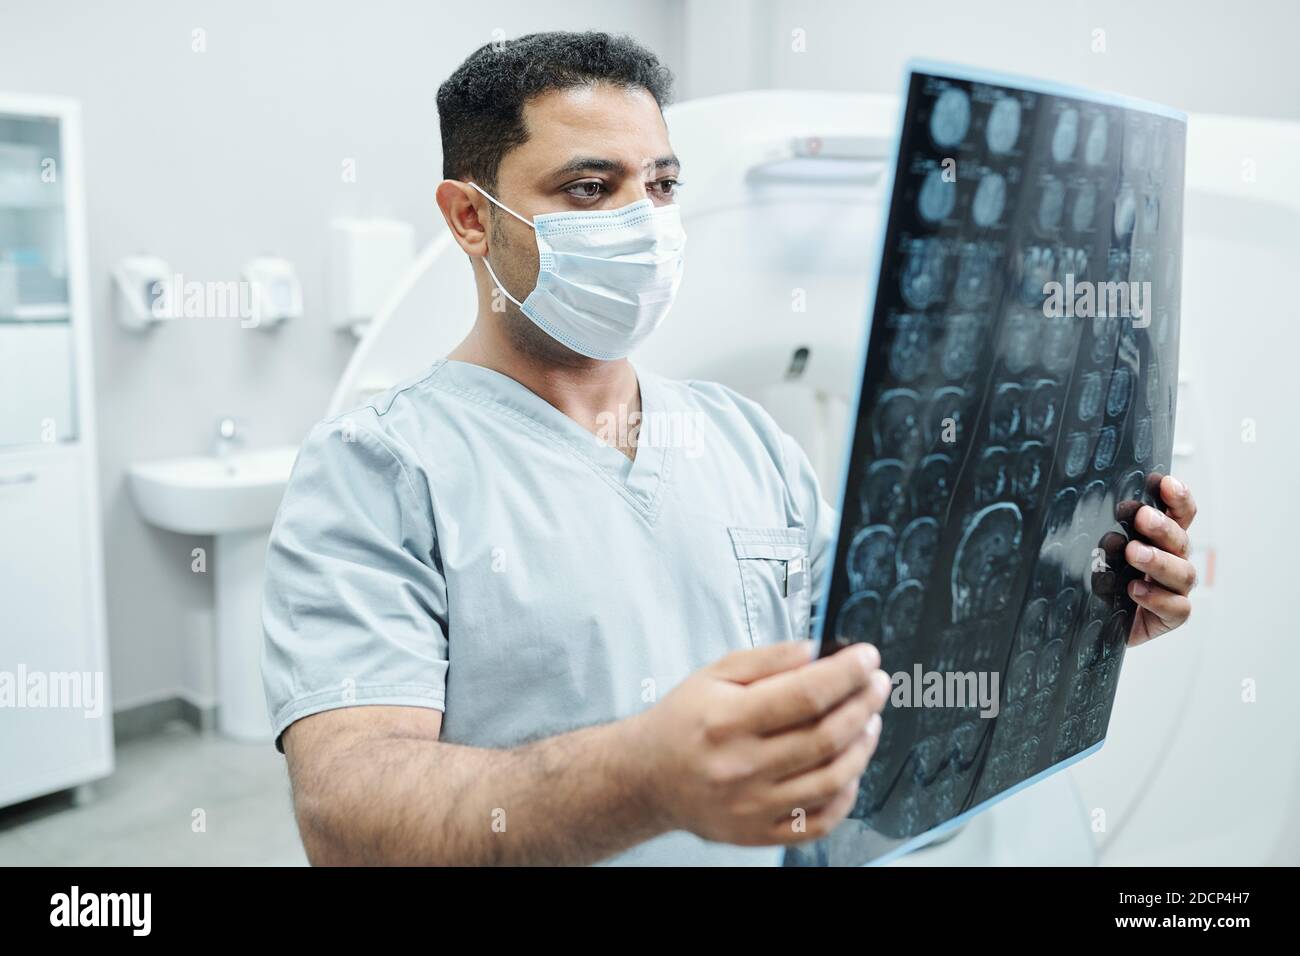 Serious male radiologist in mask and uniform looking at x-ray image of patient Stock Photo